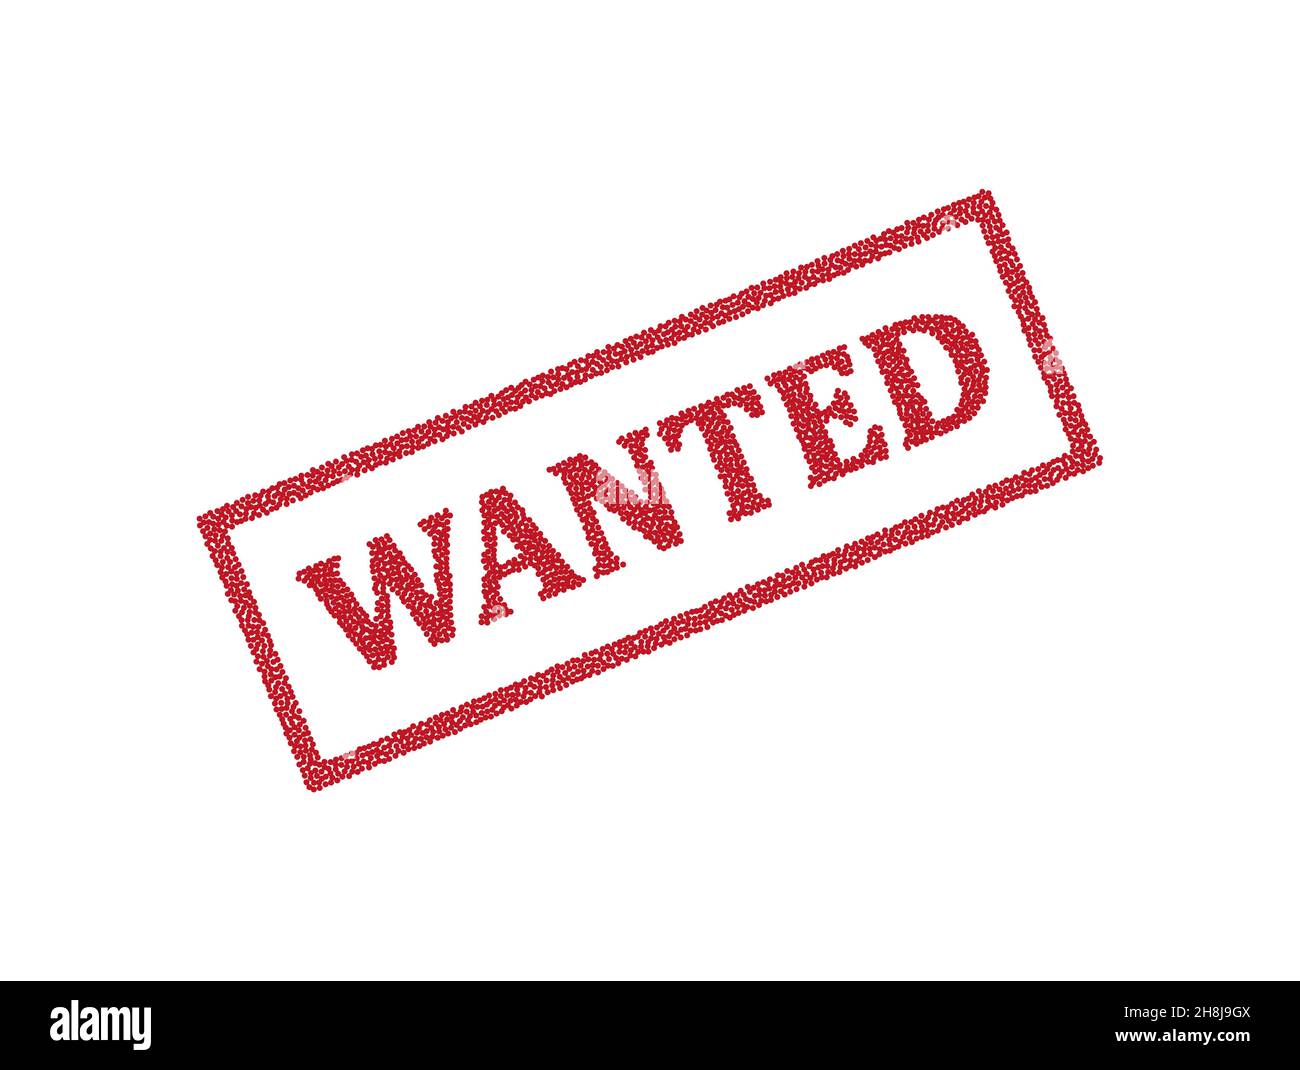 Black vector grunge stamp WANTED Stock Vector